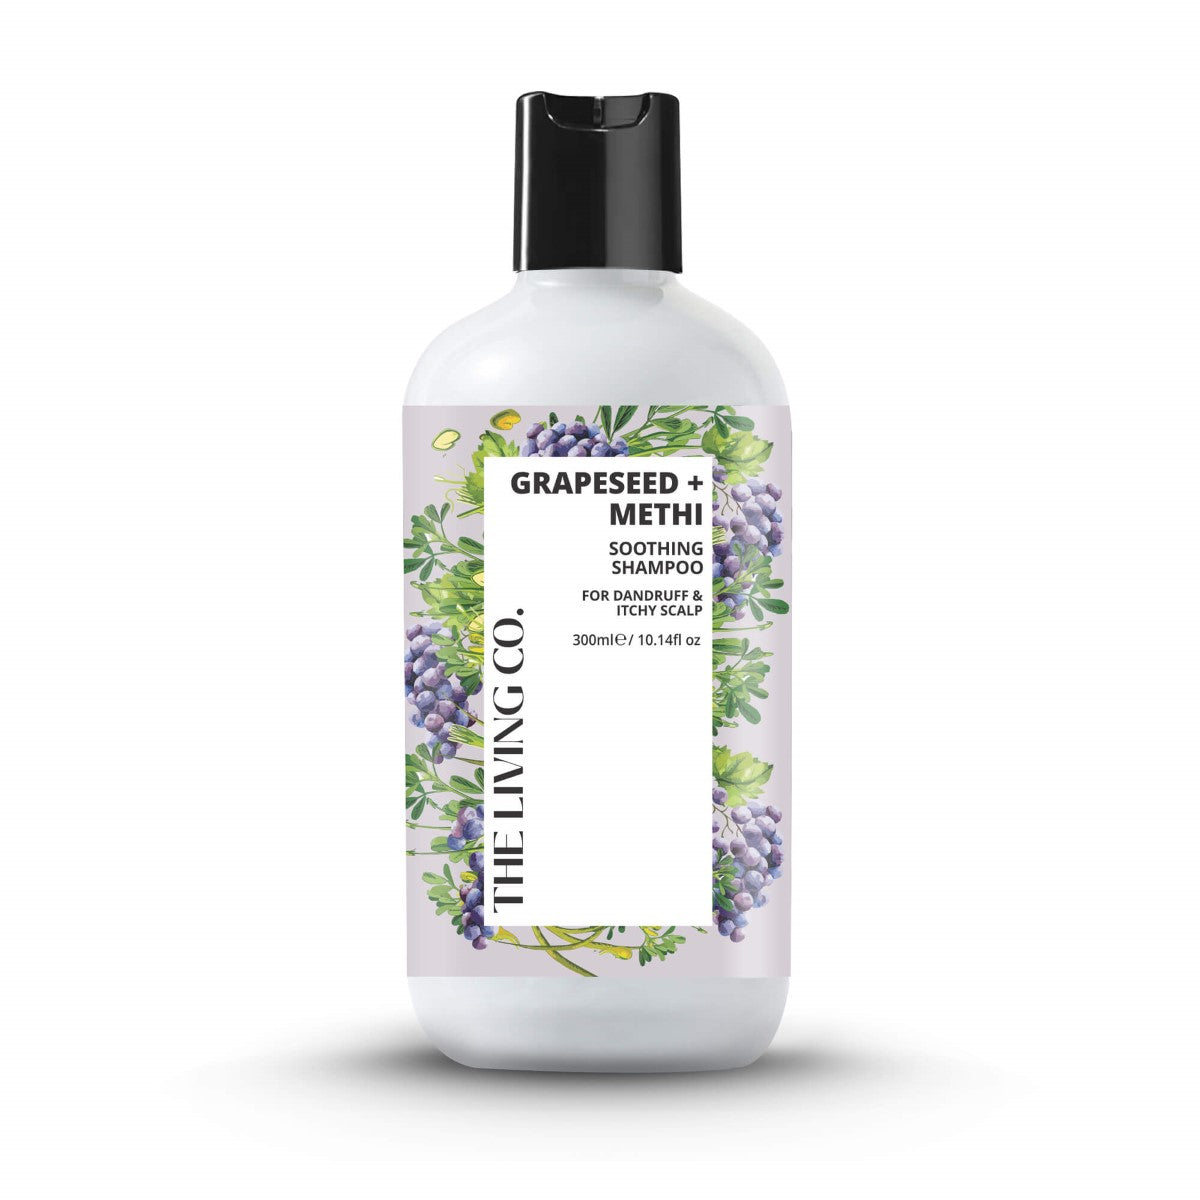 Soothing Shampoo With Grapeseed + Methi